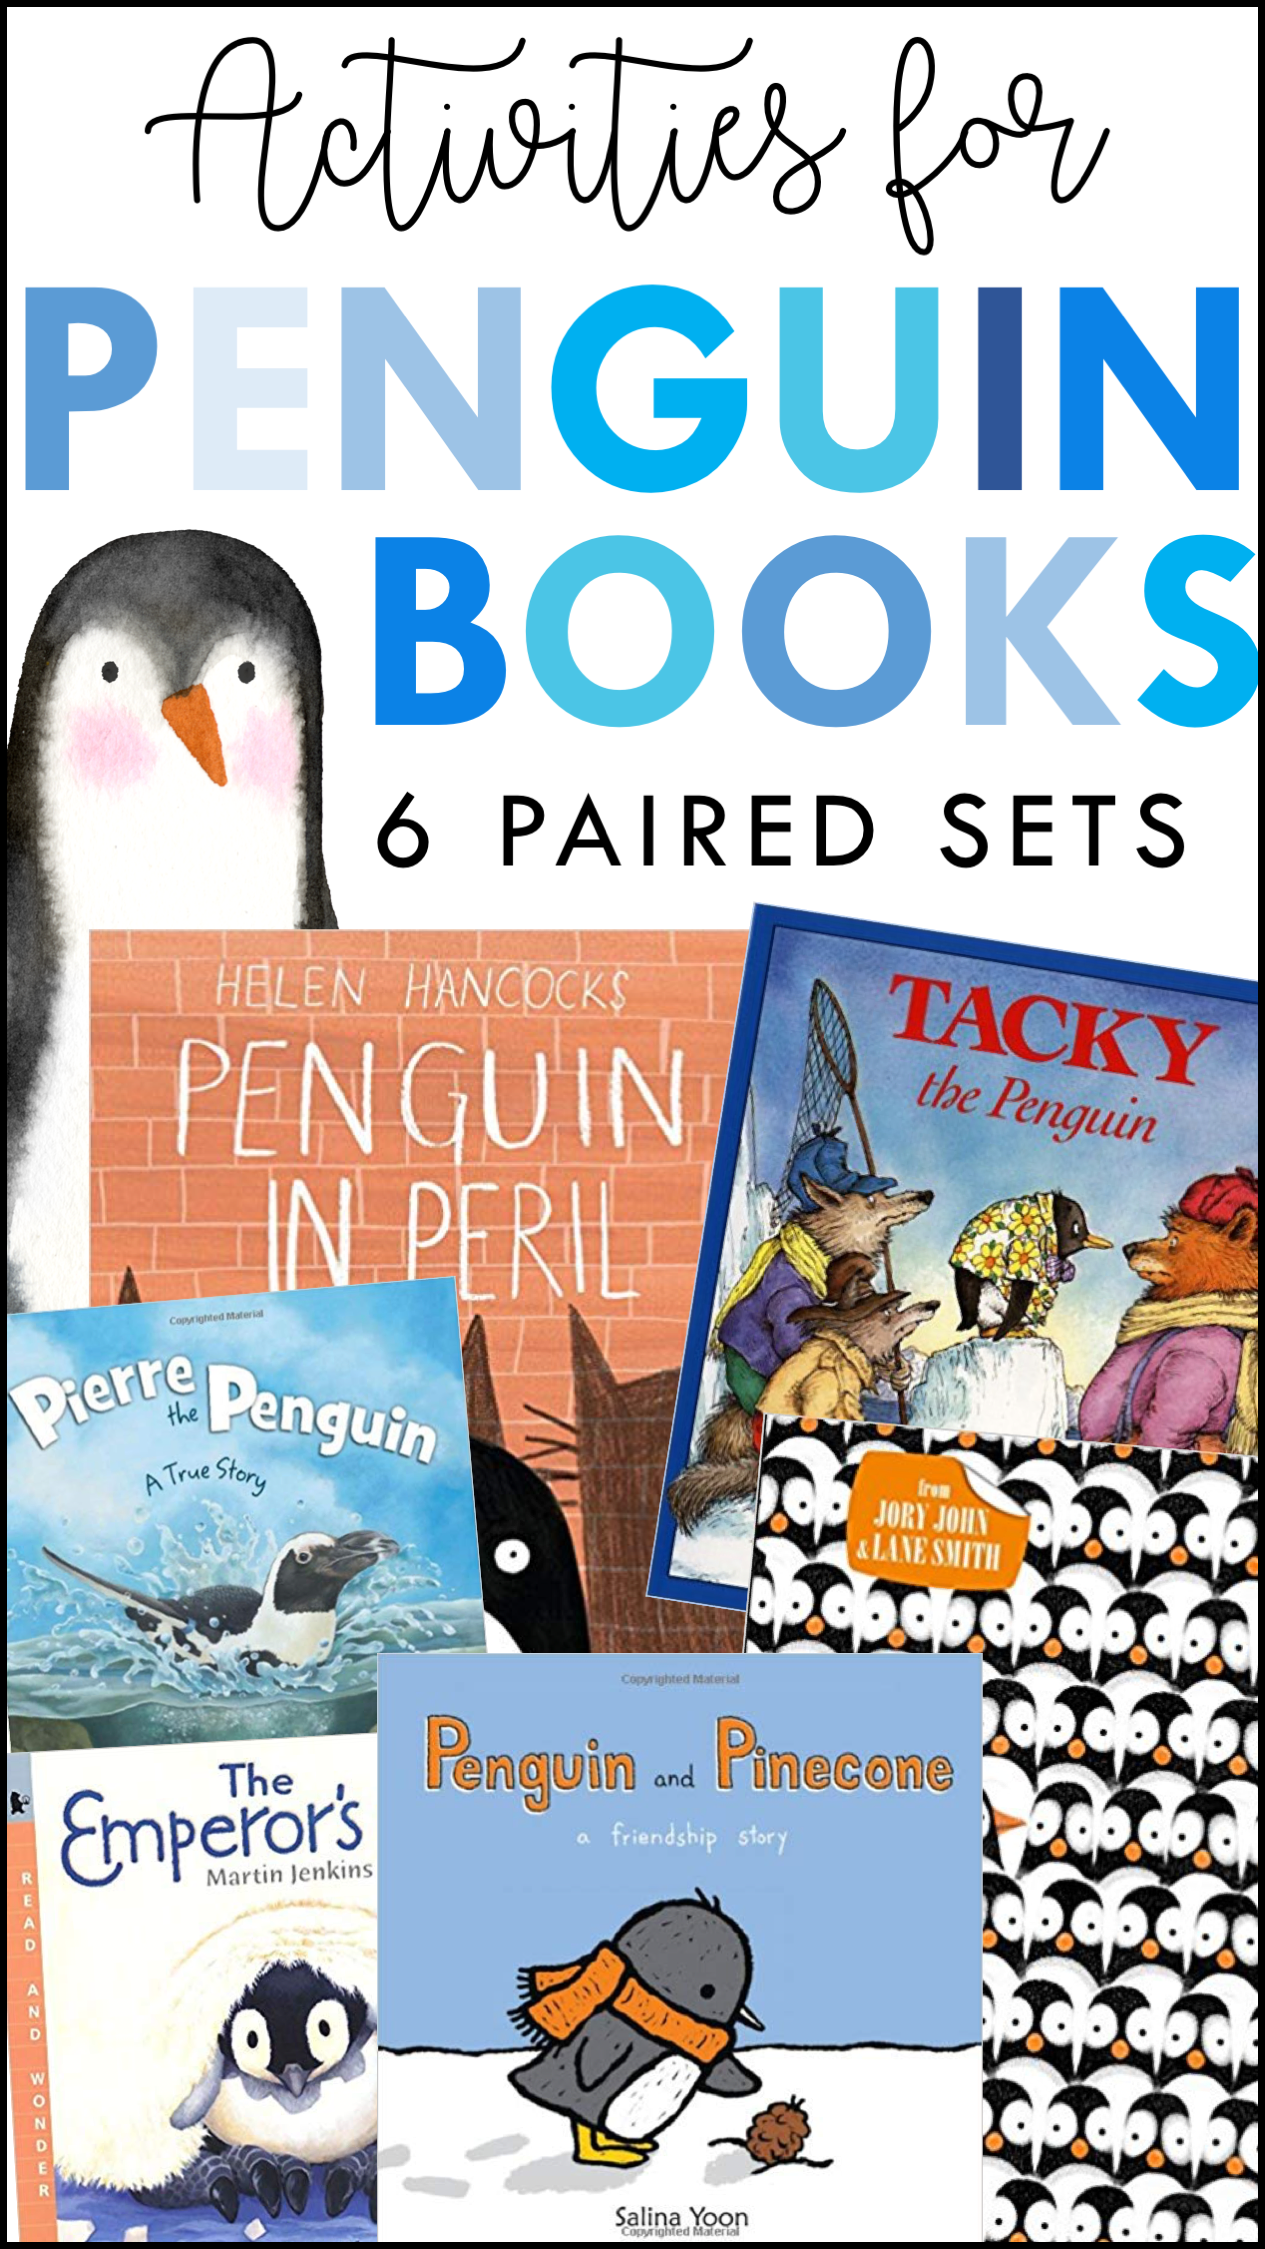 This post shares my favorite penguin books for kids, along with paired ELA activities that support vocabulary, comprehension and a variety of standards-based skills appropriate for grades kindergarten, first grade, and second grade.